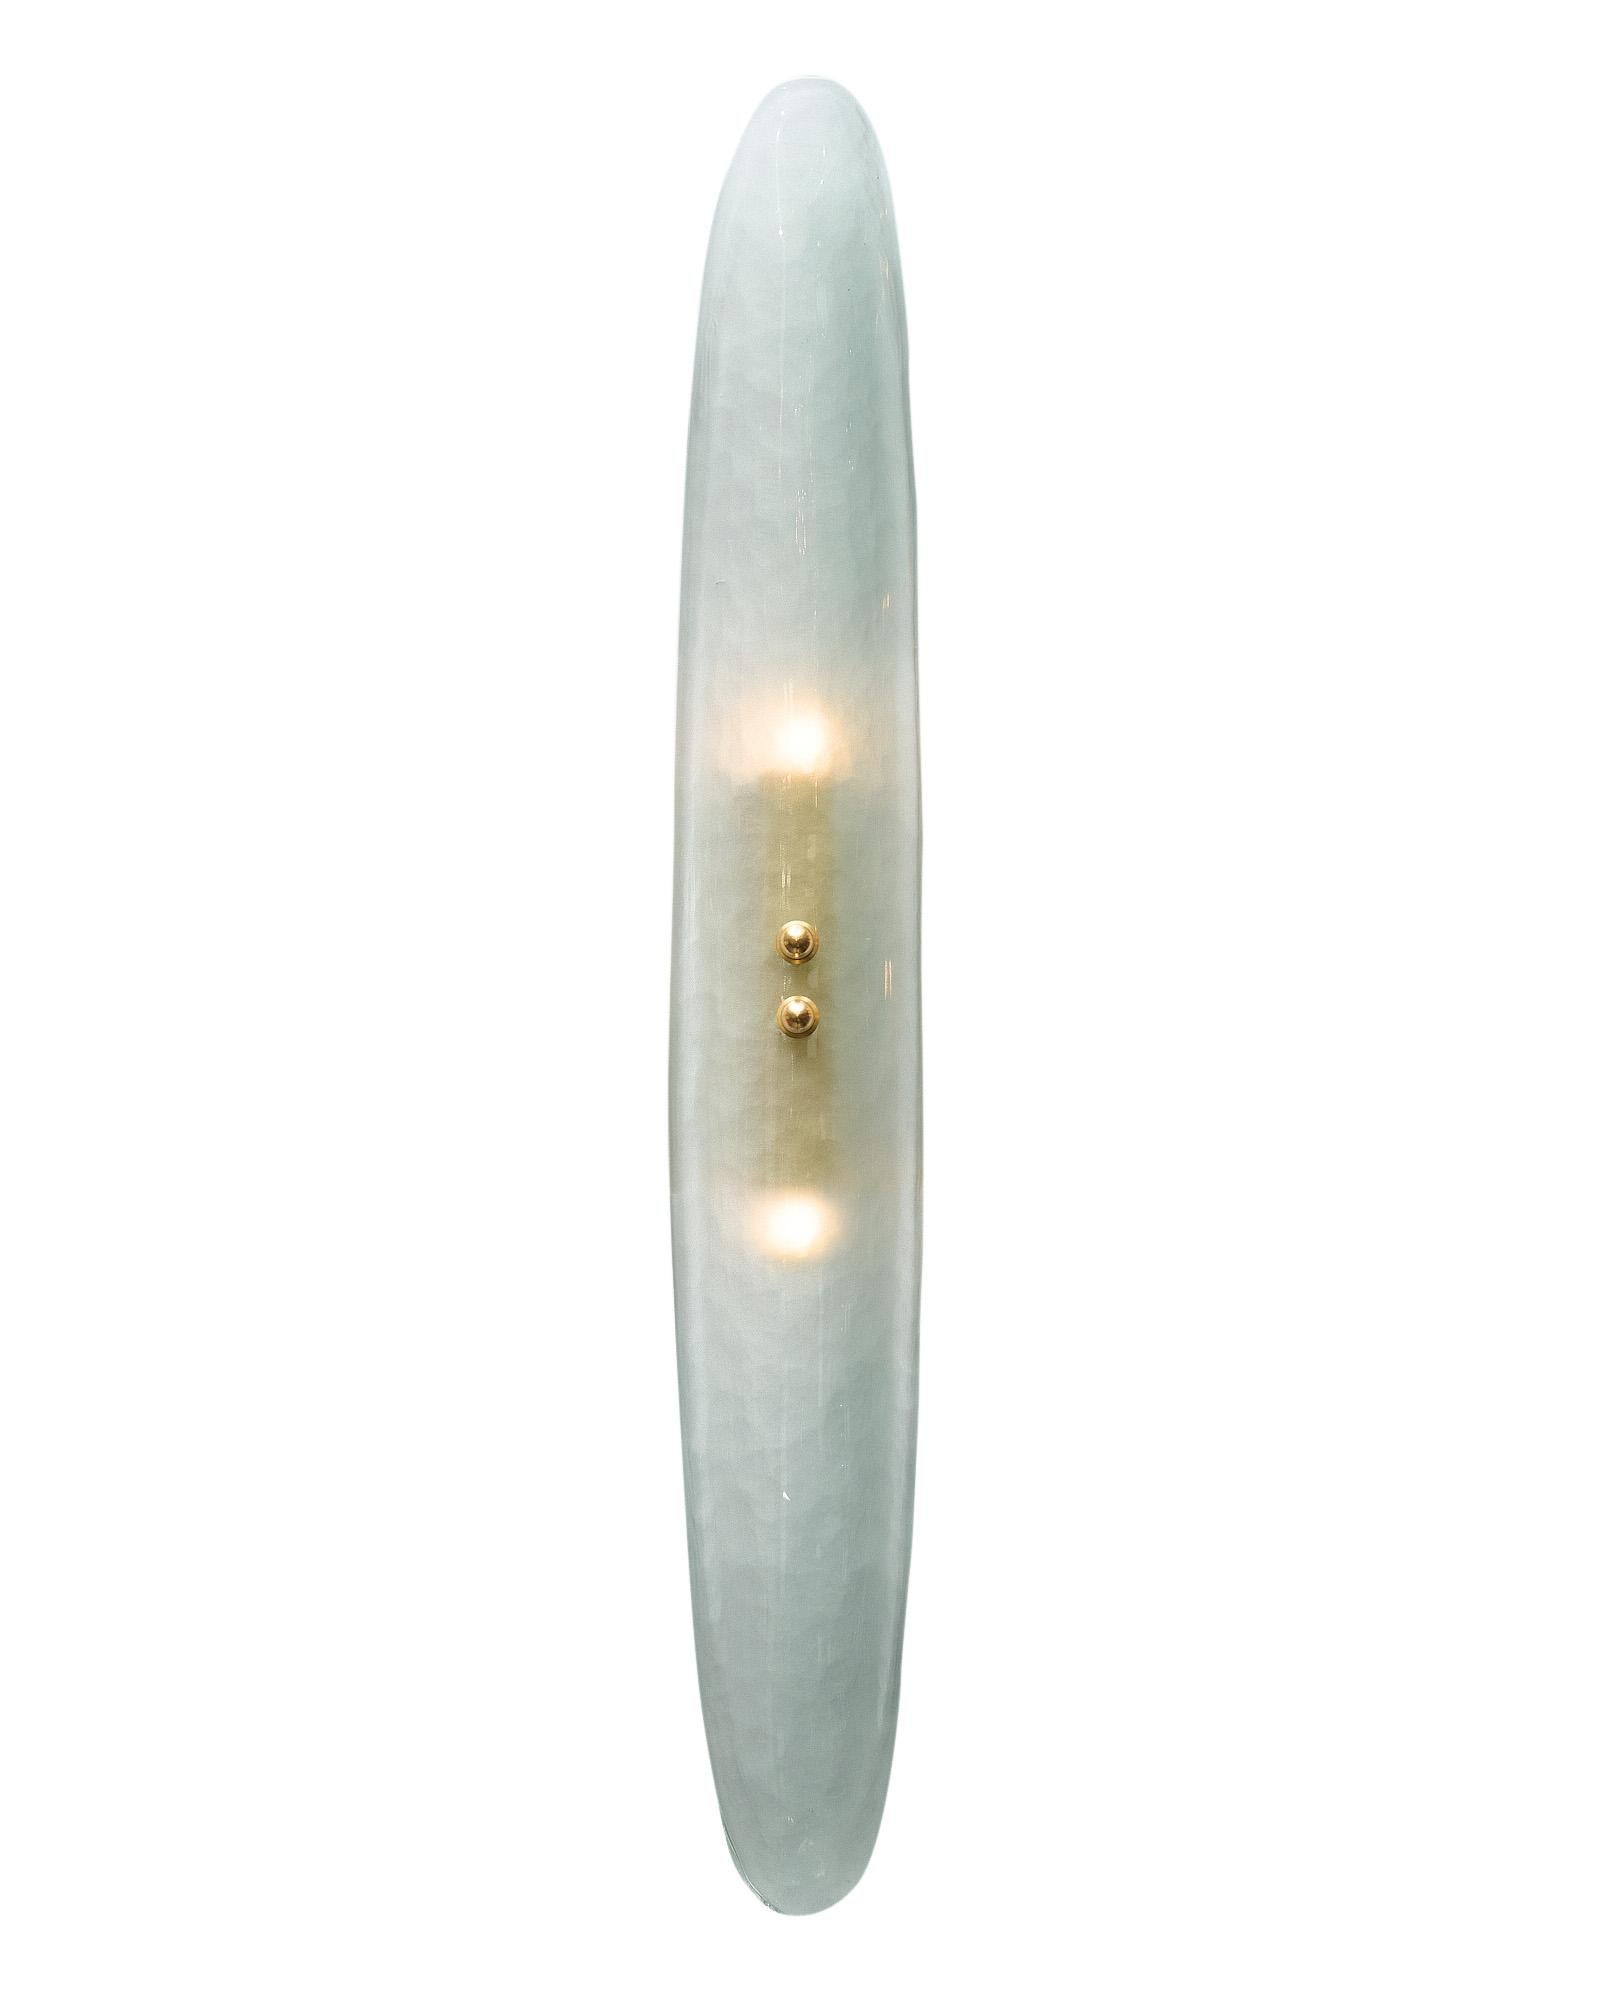 Pair of Murano glass sconces; each crafted with a single curved panel of hand-blown aqua glass on a brass frame. We love the modern style and hand-crafted quality of these sconces. They have been newly wired to fit US standards.